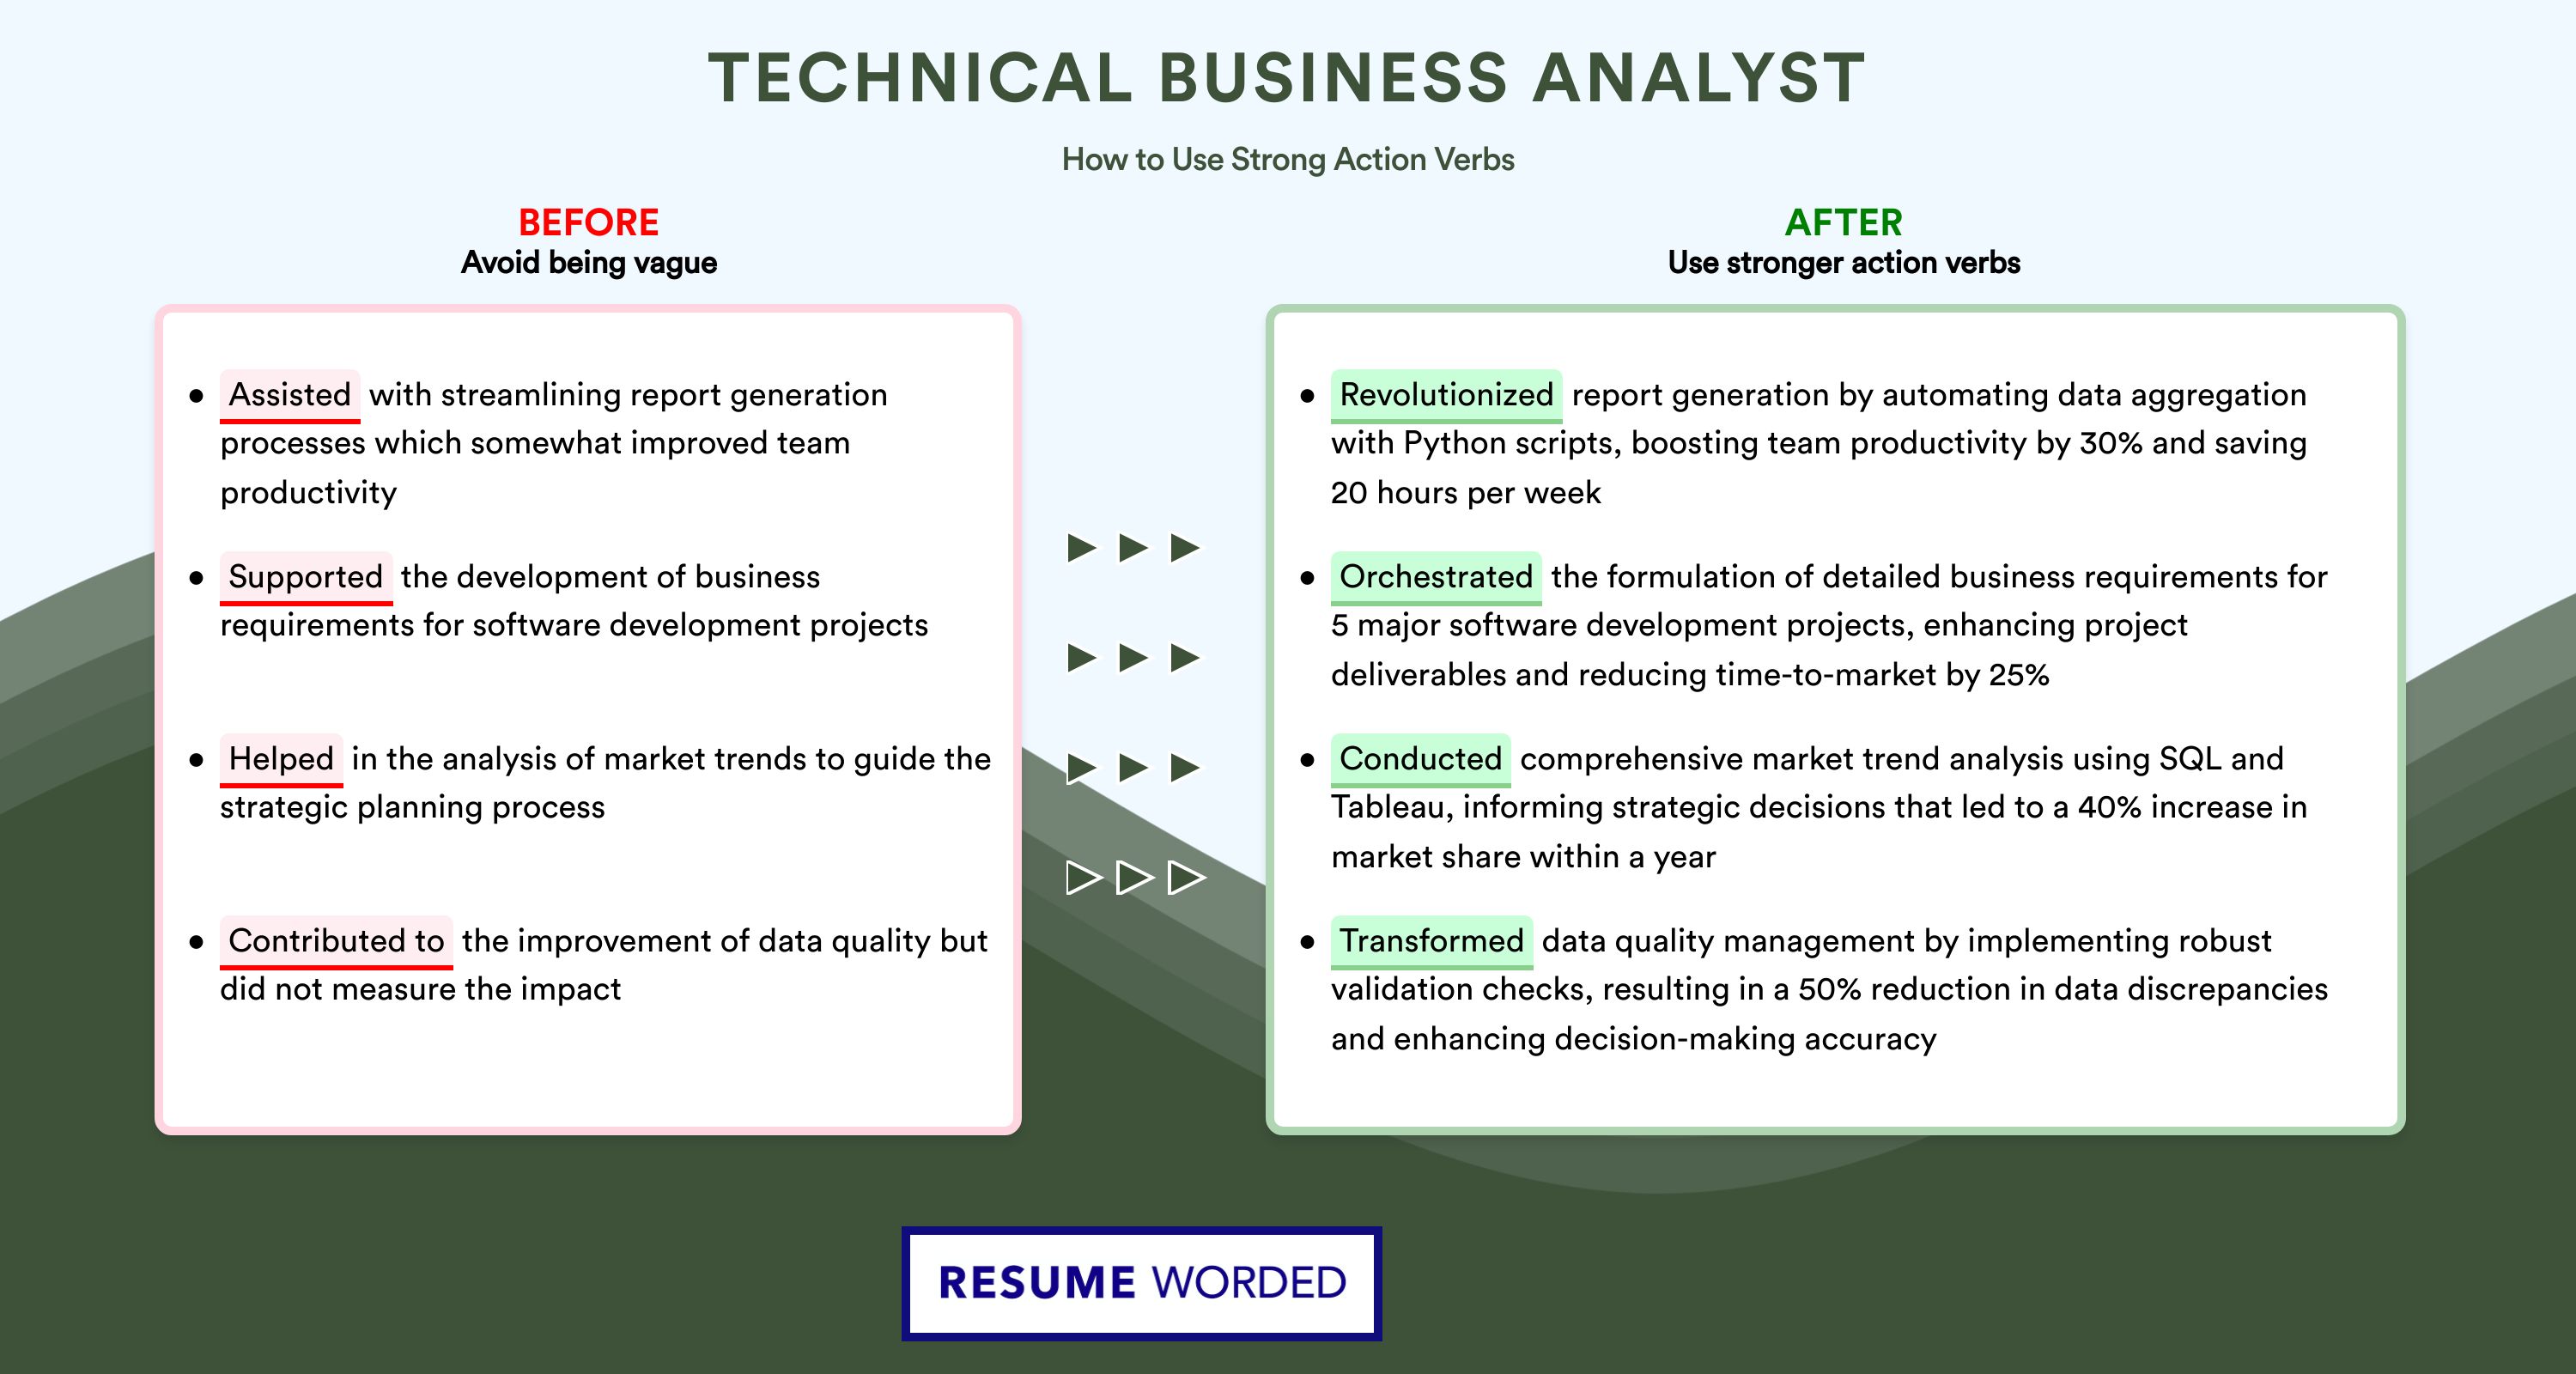 Action Verbs for Technical Business Analyst